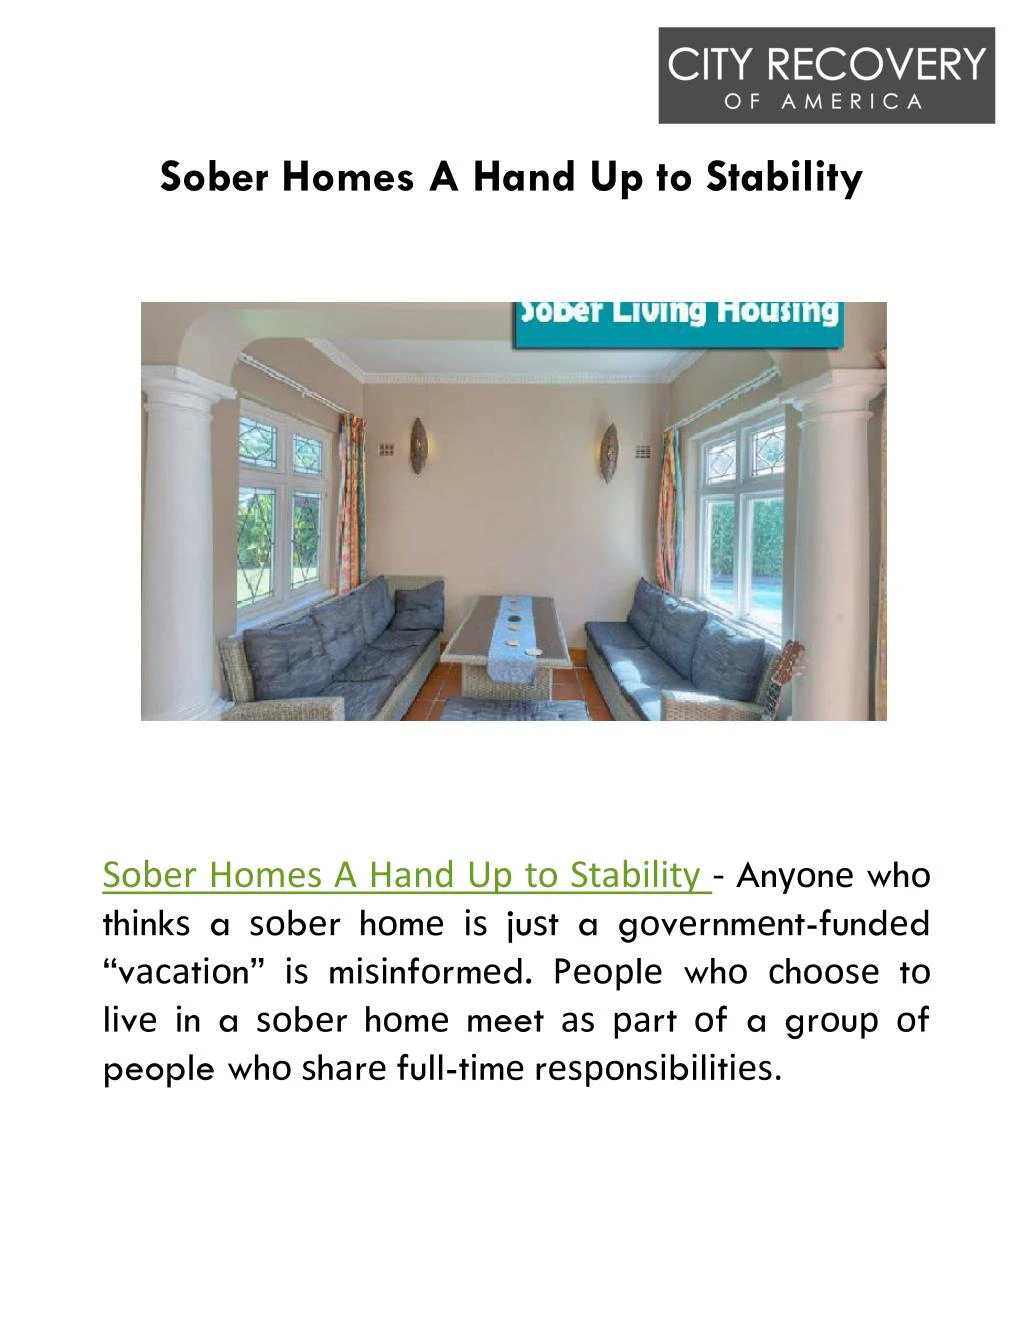 sober homes a hand up to stability